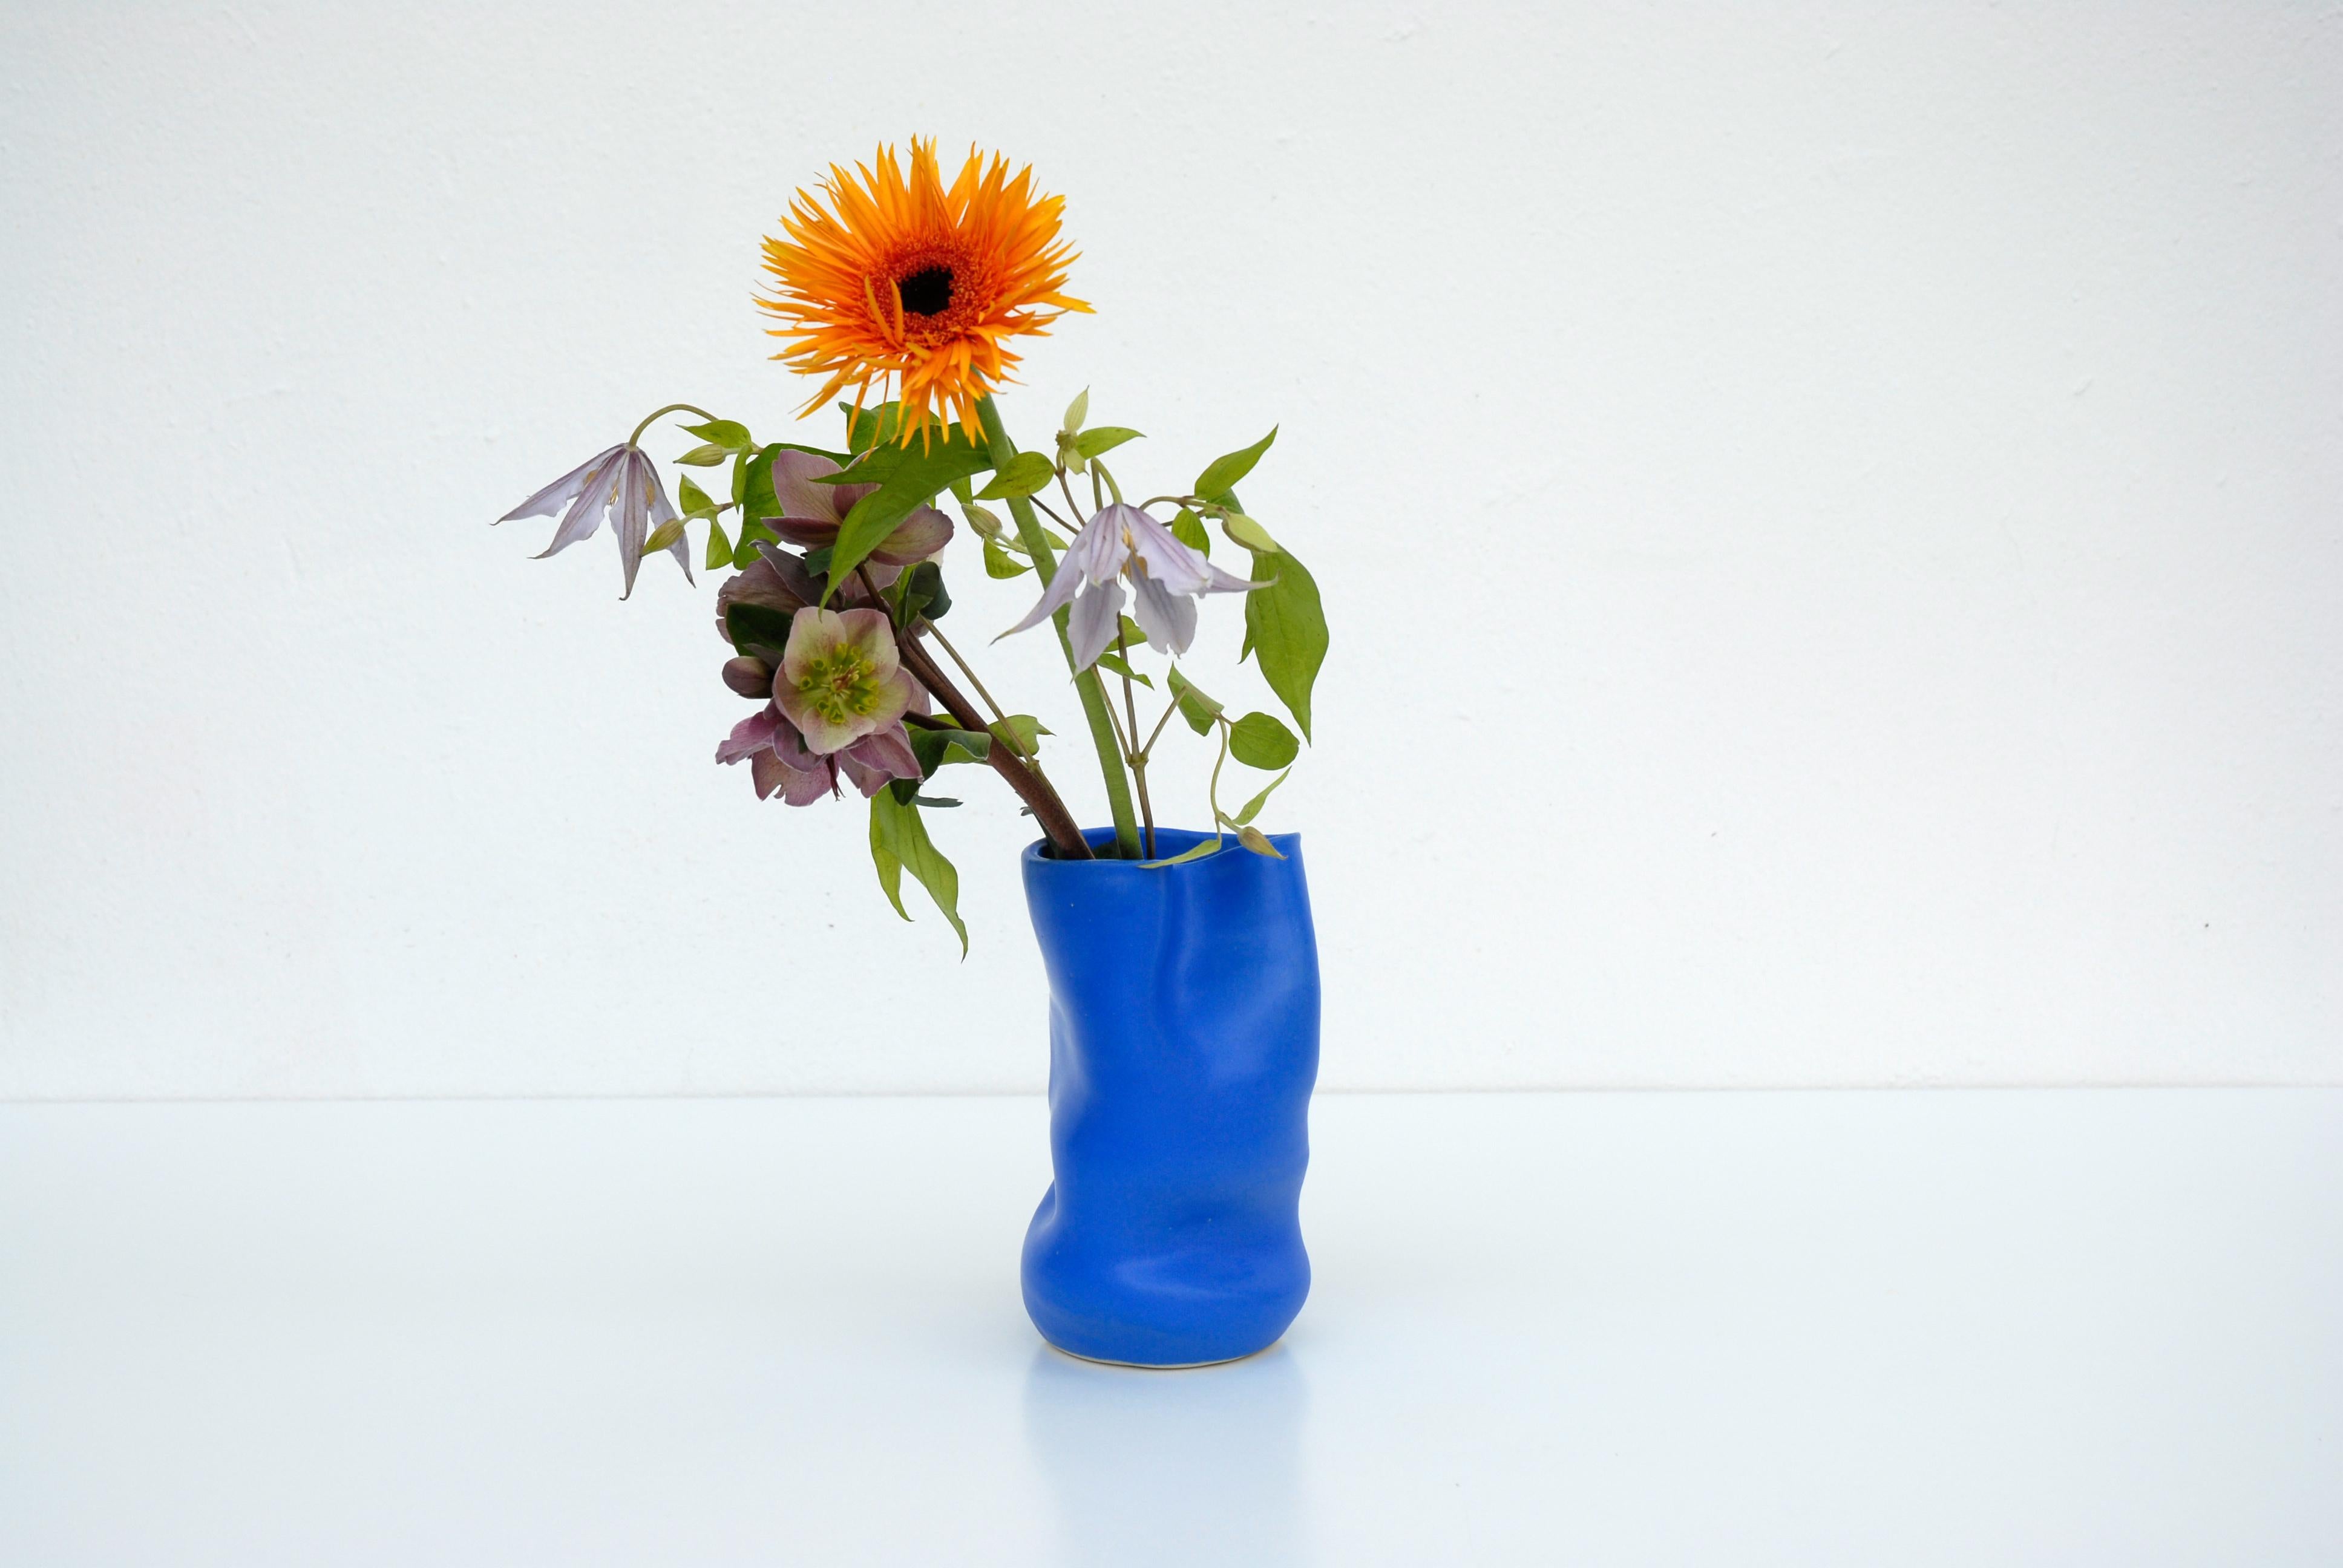 Organic Modern Electric Blue Helix Vase Handmade in Barcelona by Niho Ceramics For Sale